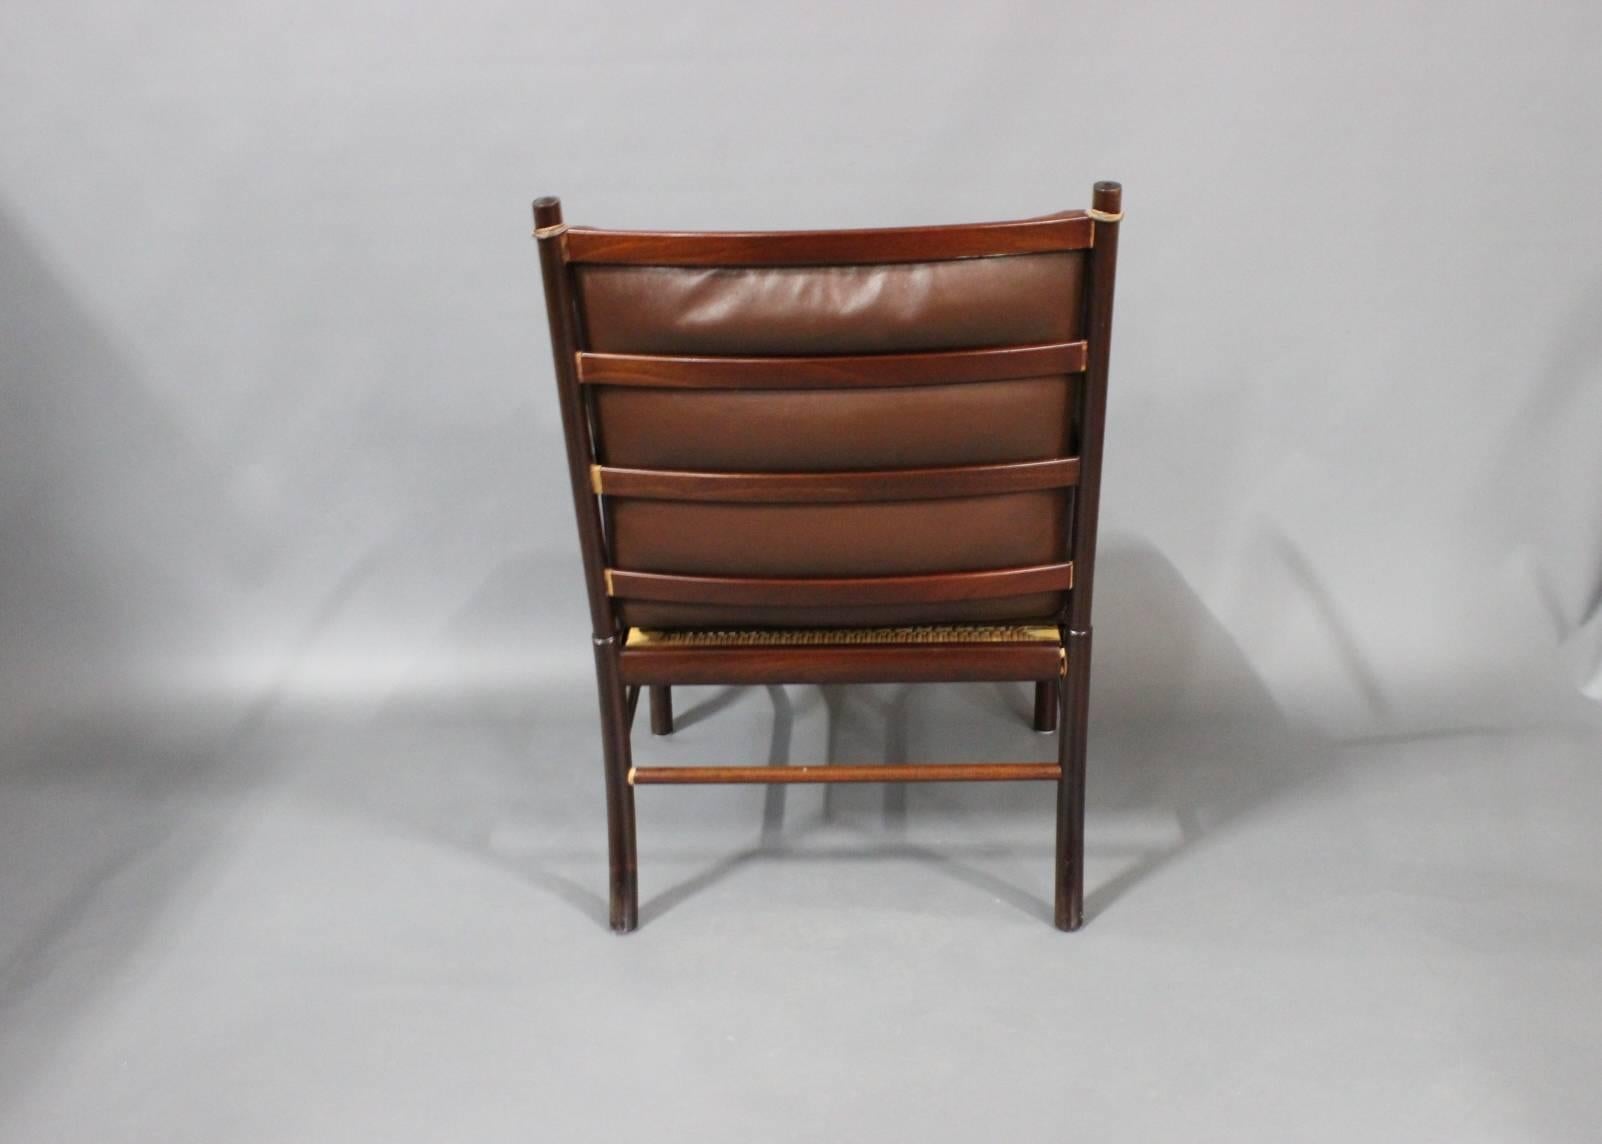 Danish Colonial Chair, Model PJ 149, Designed by Ole Wanscher, 1949